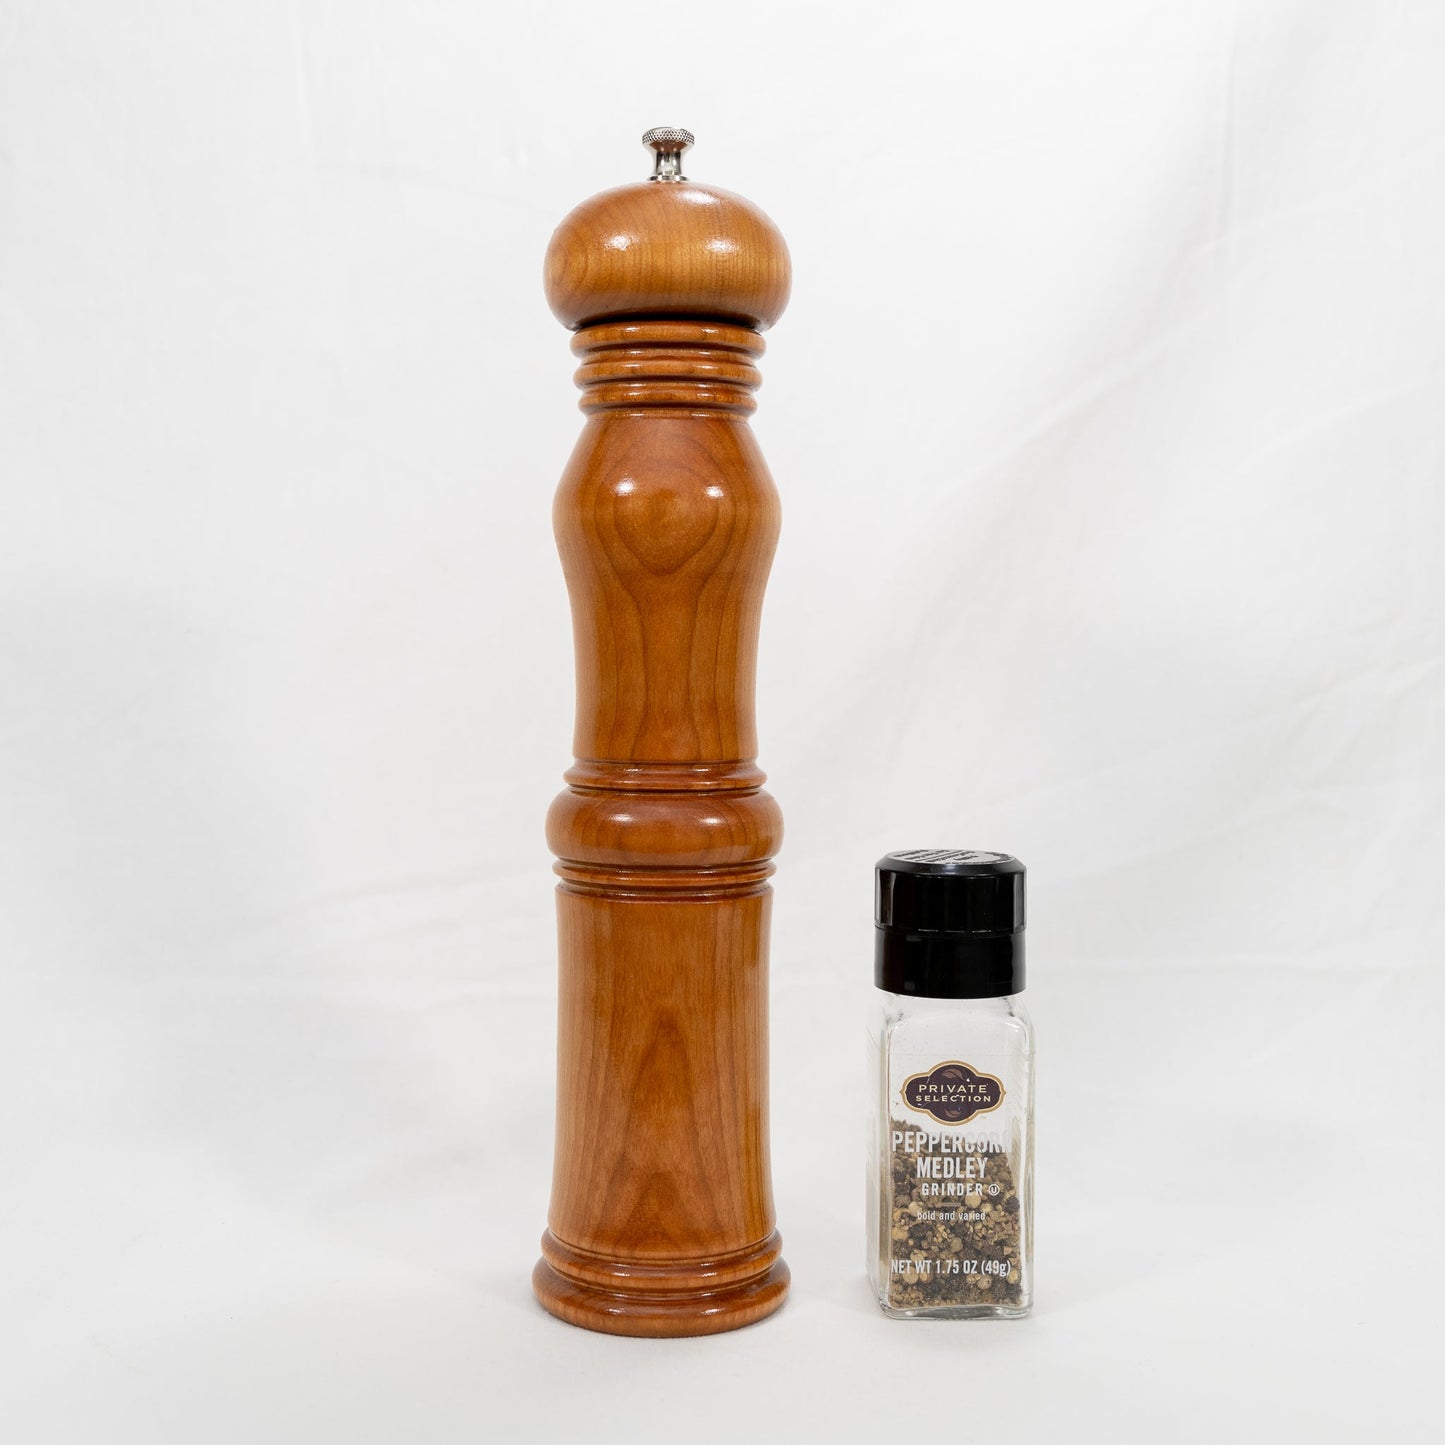 Handmade large Cherry wood adjustable pepper mill with stainless steel grinder with food grade safe finish